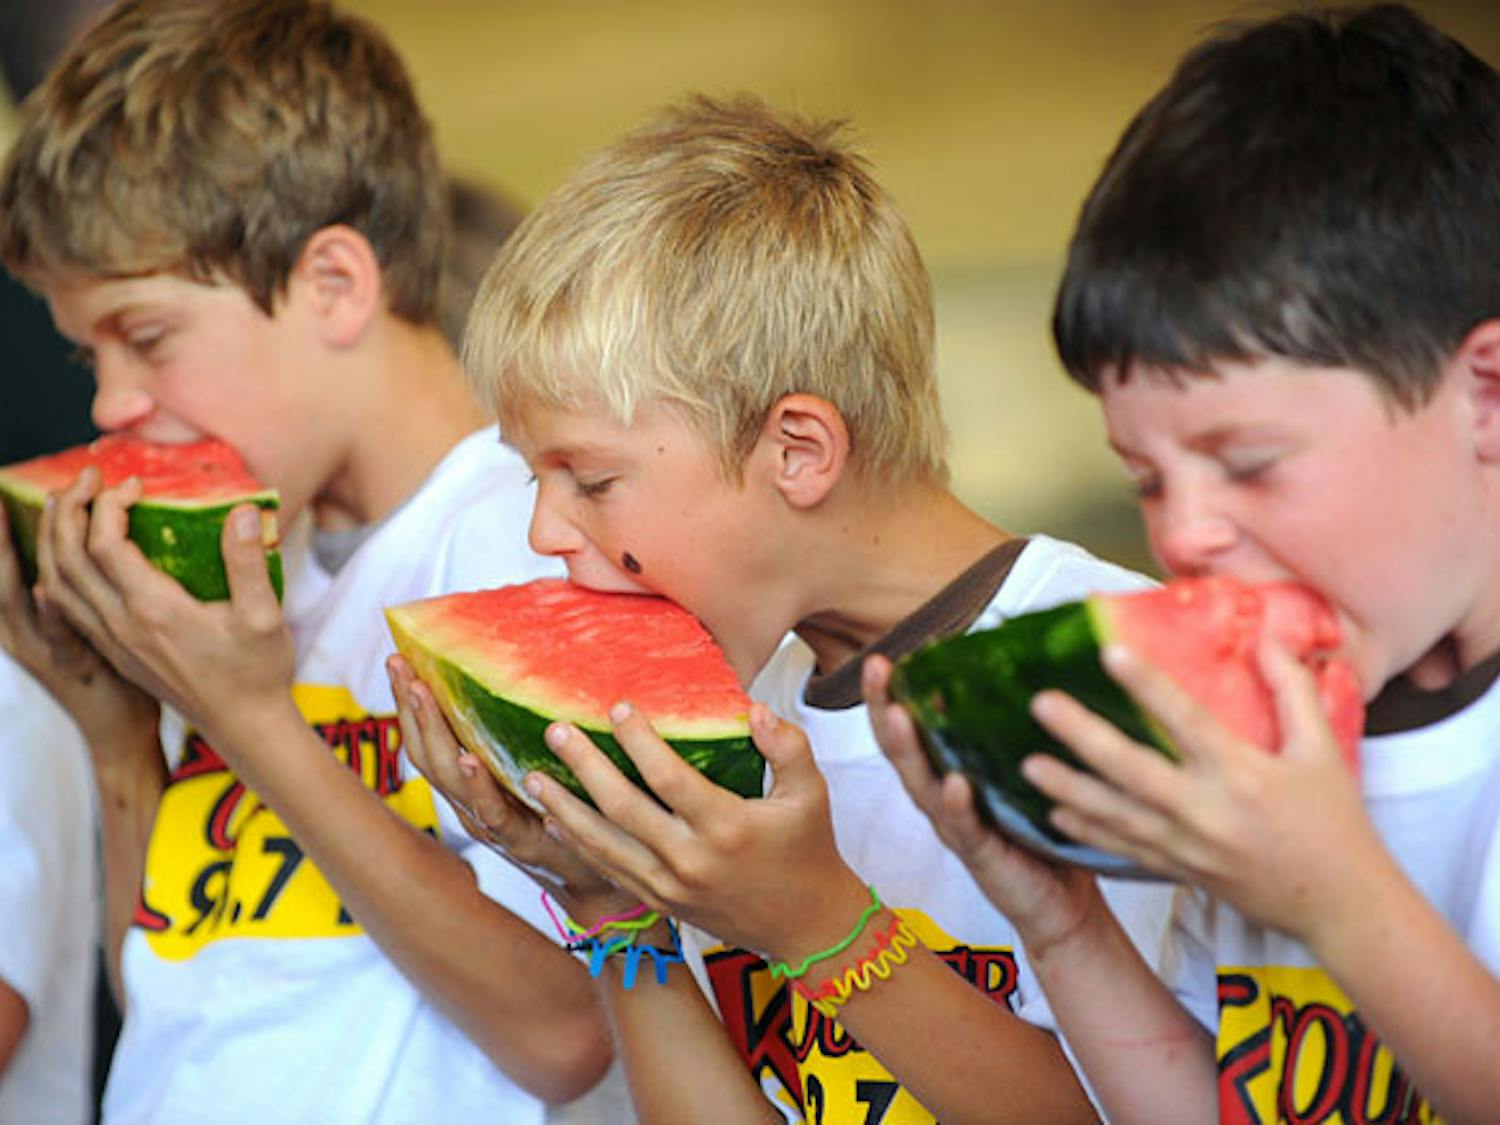 Zion Barber, left, Jacob Musselwhite and Colton Crane, right, sink their teeth into pieces of watermelon during the watermelon-eating contest at the 65th annual Newberry Watermelon Festival at the Canterbury Equestrian Showplace in 2010.